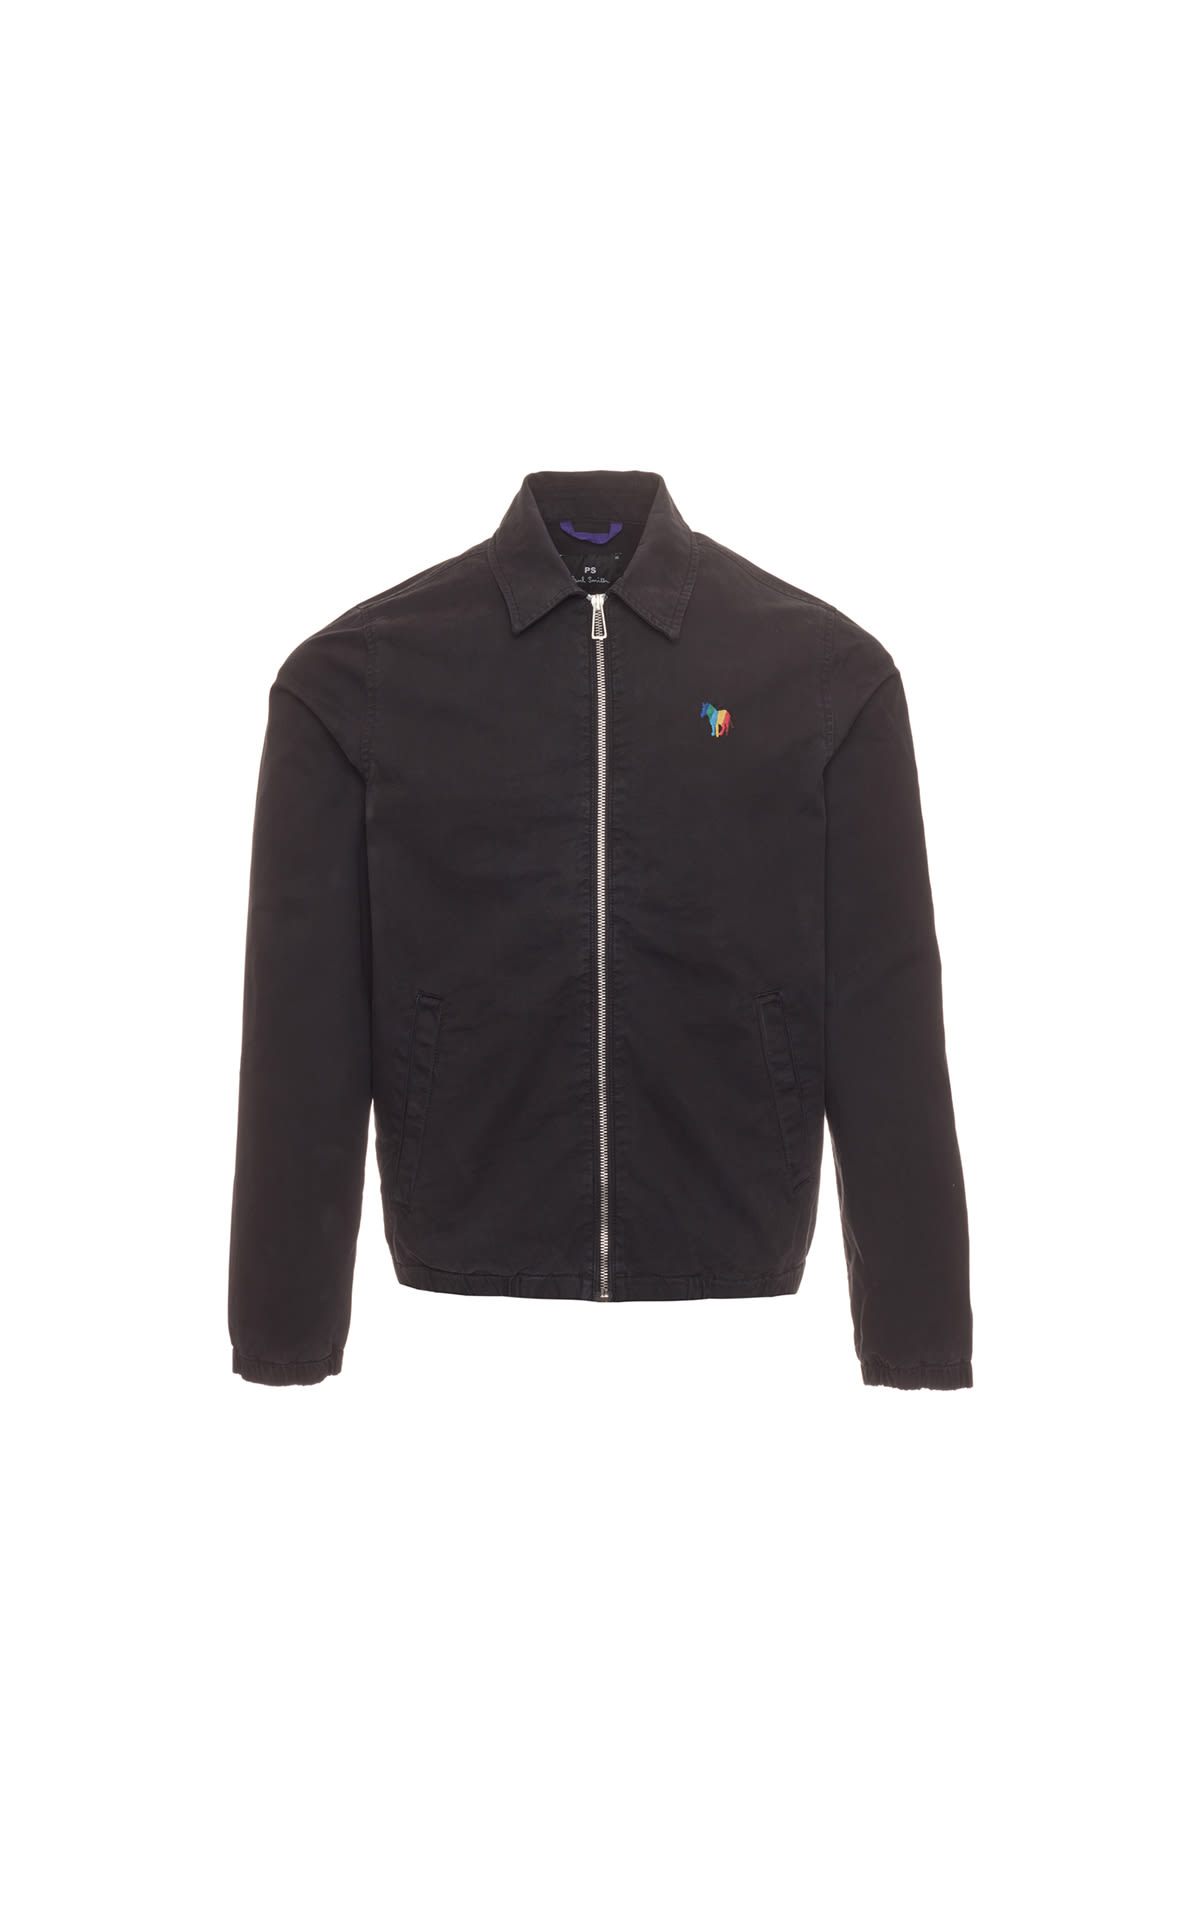 Paul Smith coaches jacket with zebra embrodery from Bicester Village